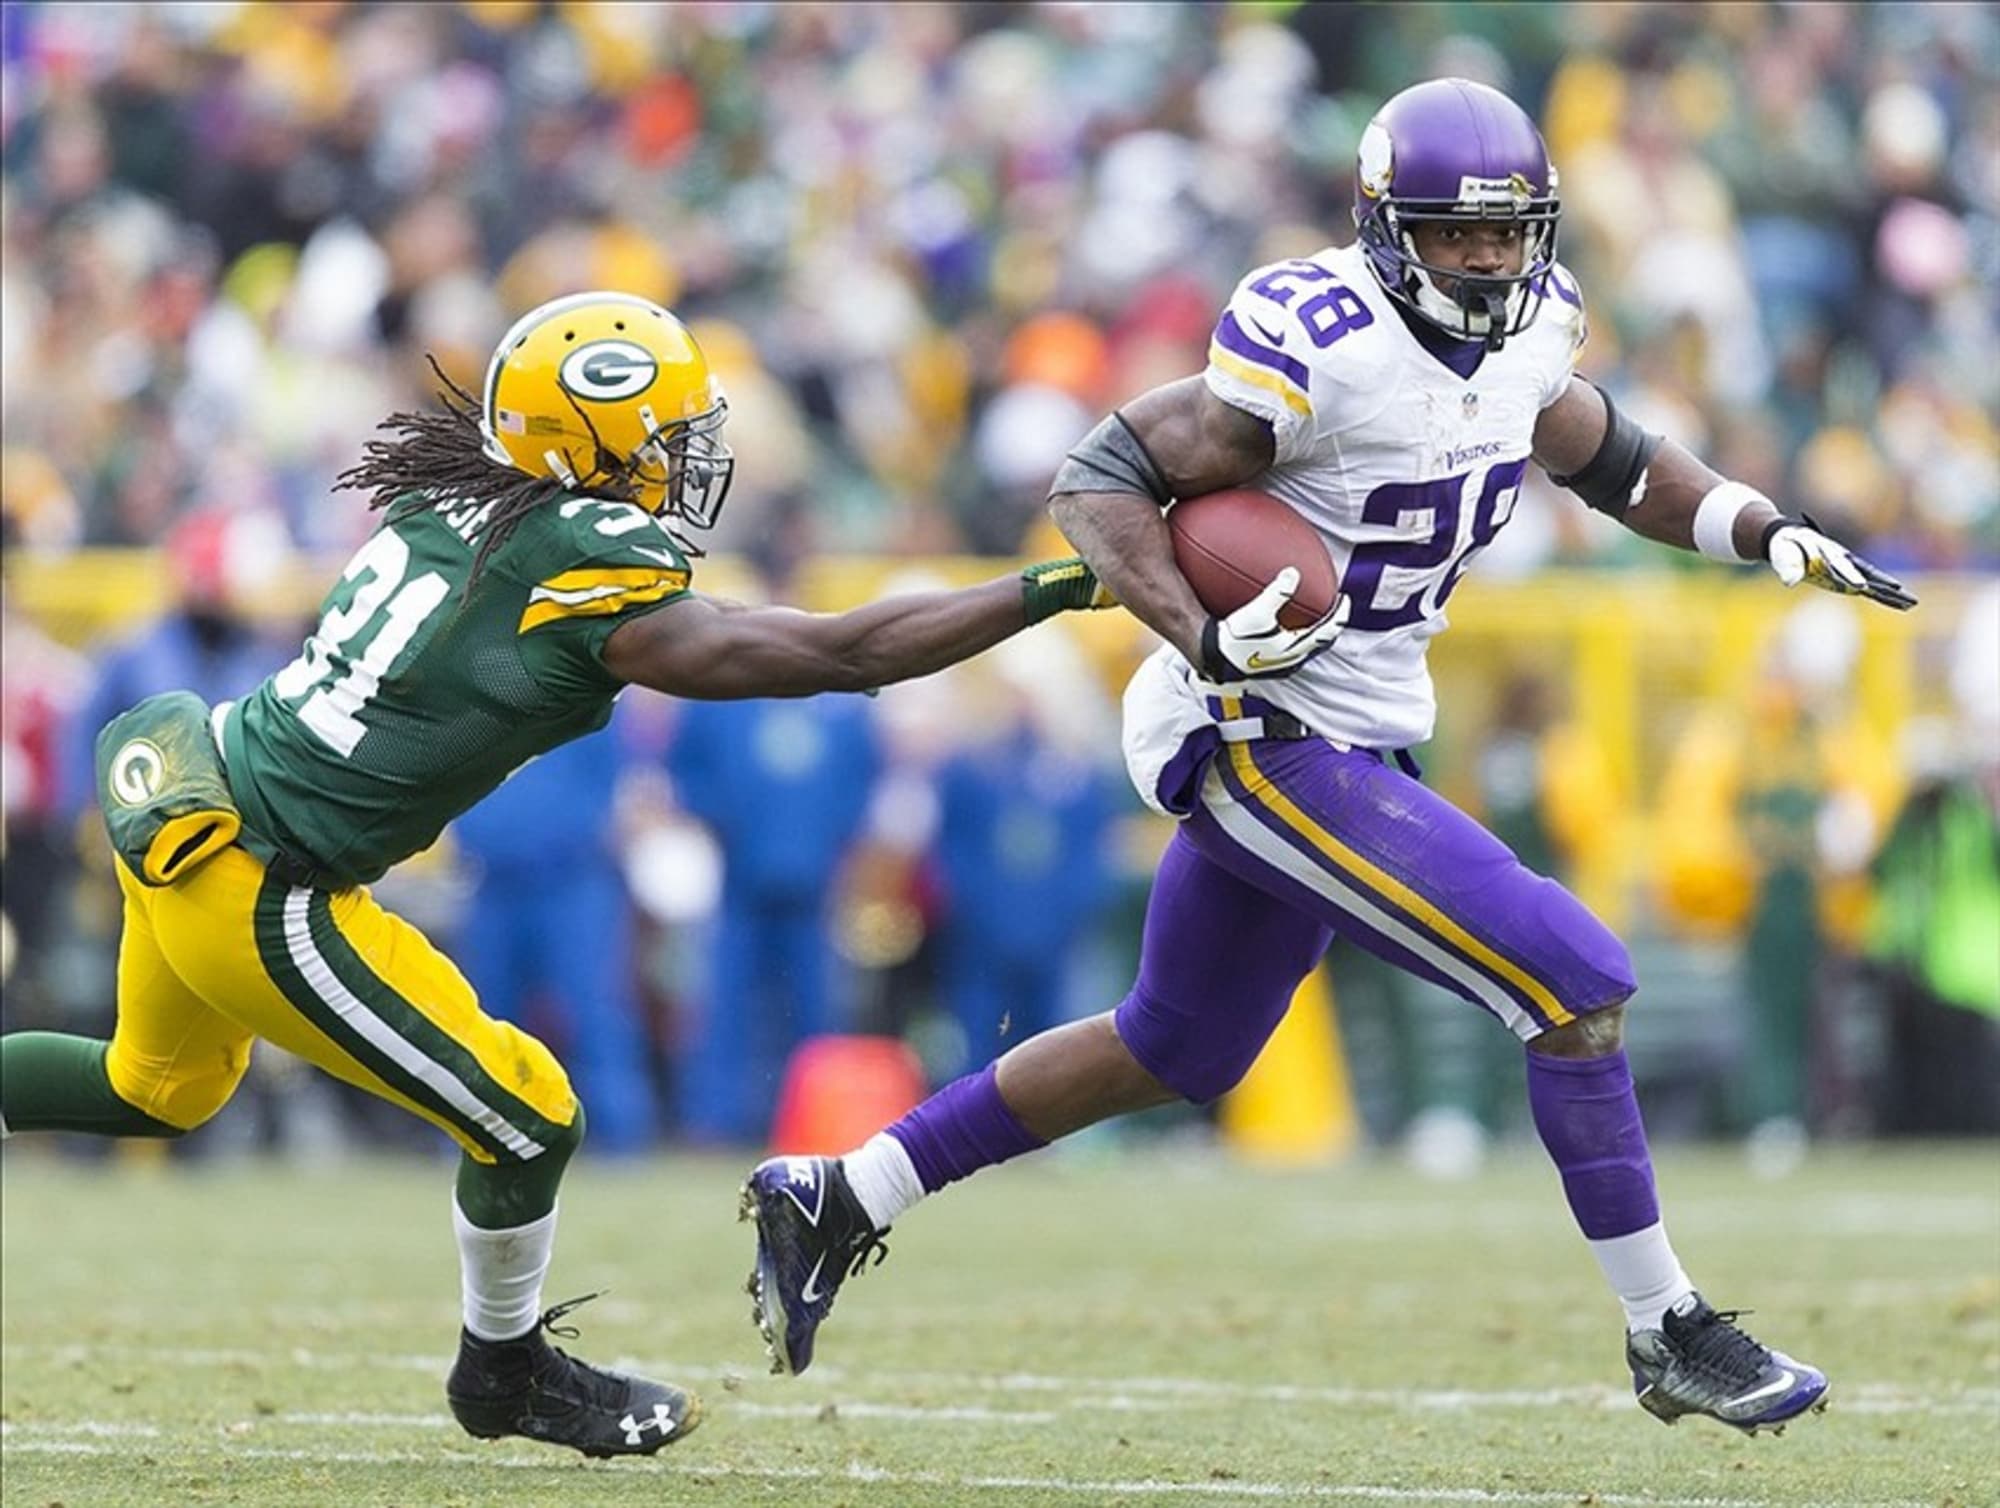 Vikings at Packers final score Overtime turns into tie, 2626